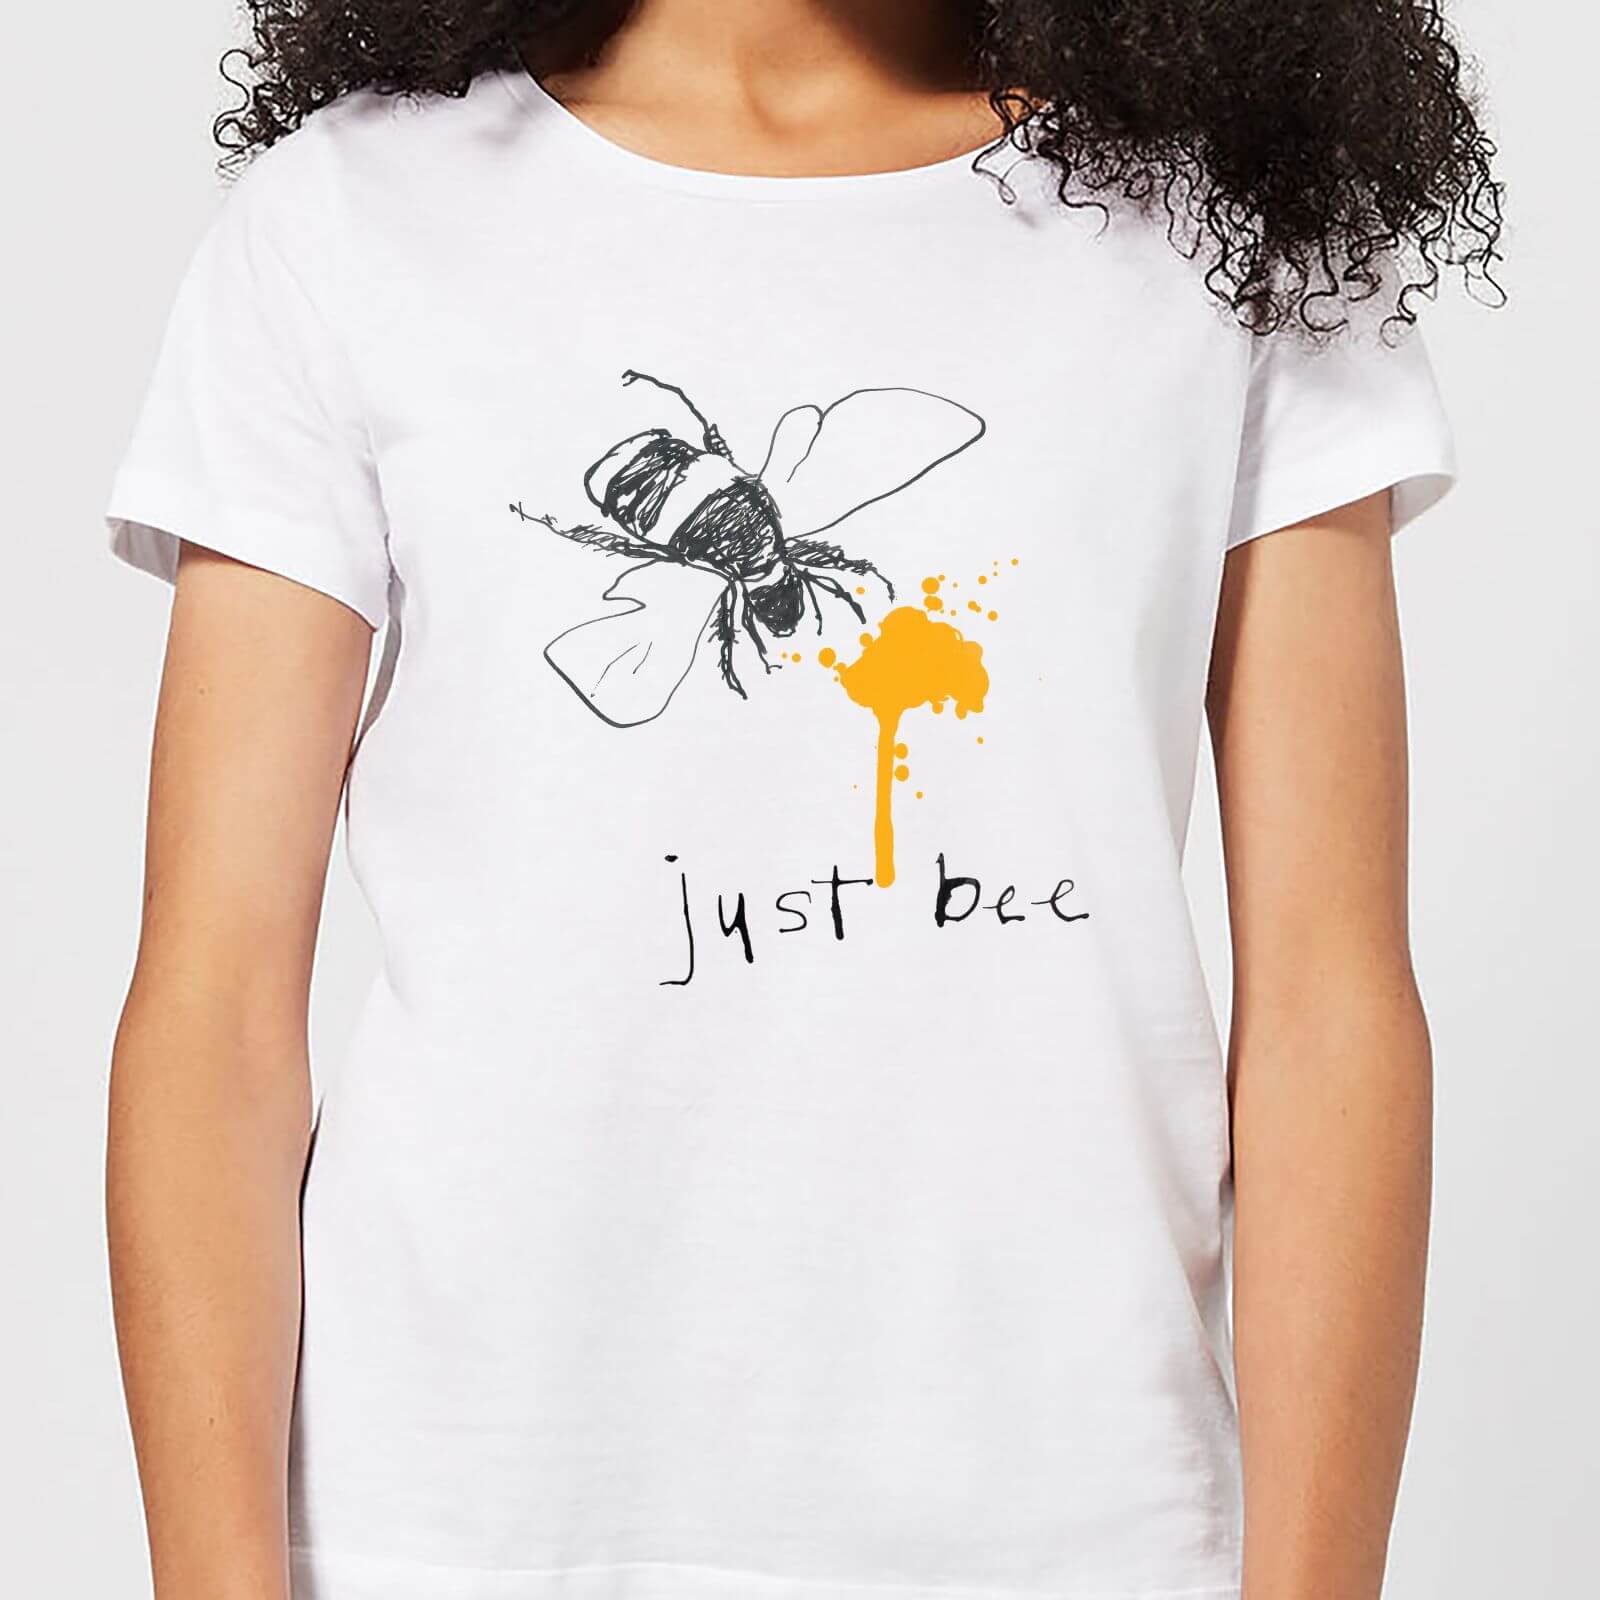 Poet and Painter Just Bee Women's T-Shirt - White - S - White